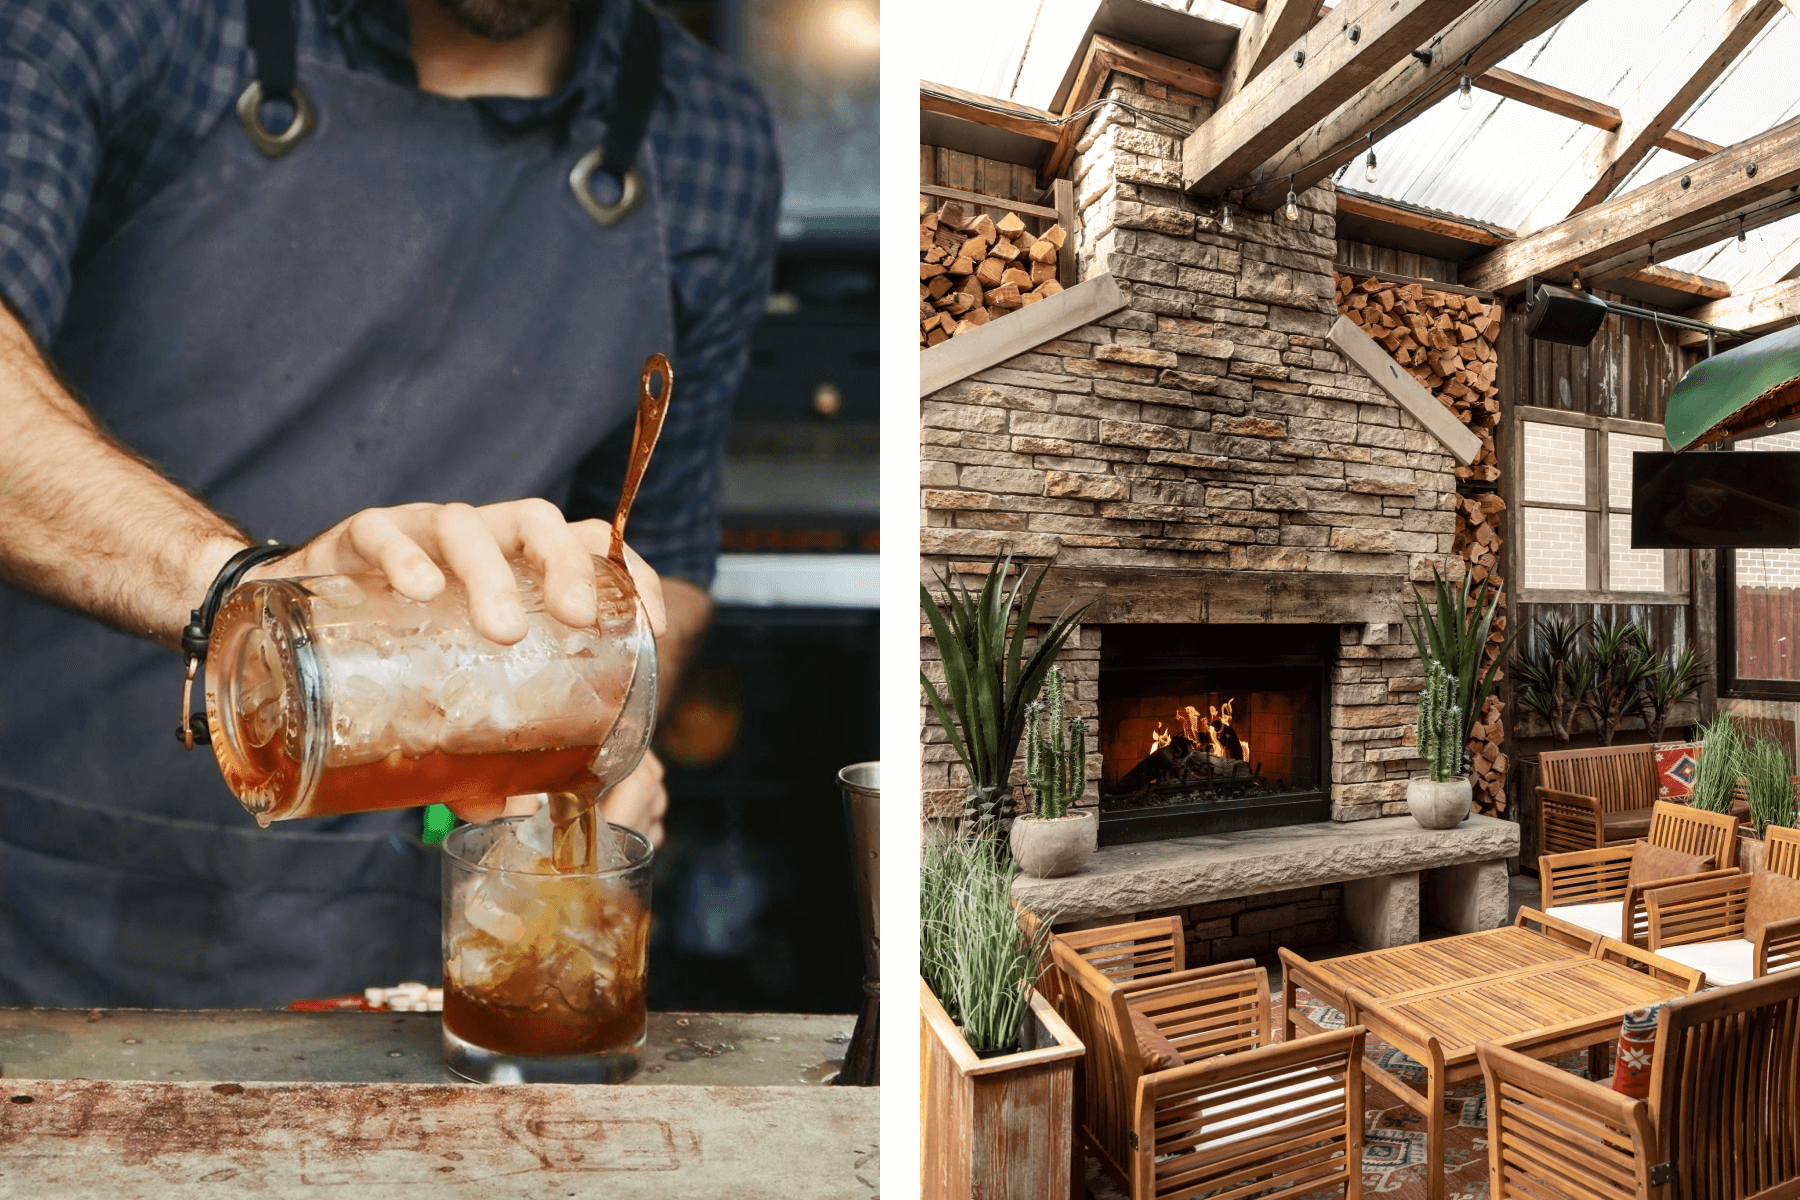 Left: A bartender pouring a drink; Right: The fireplace at Frontier.